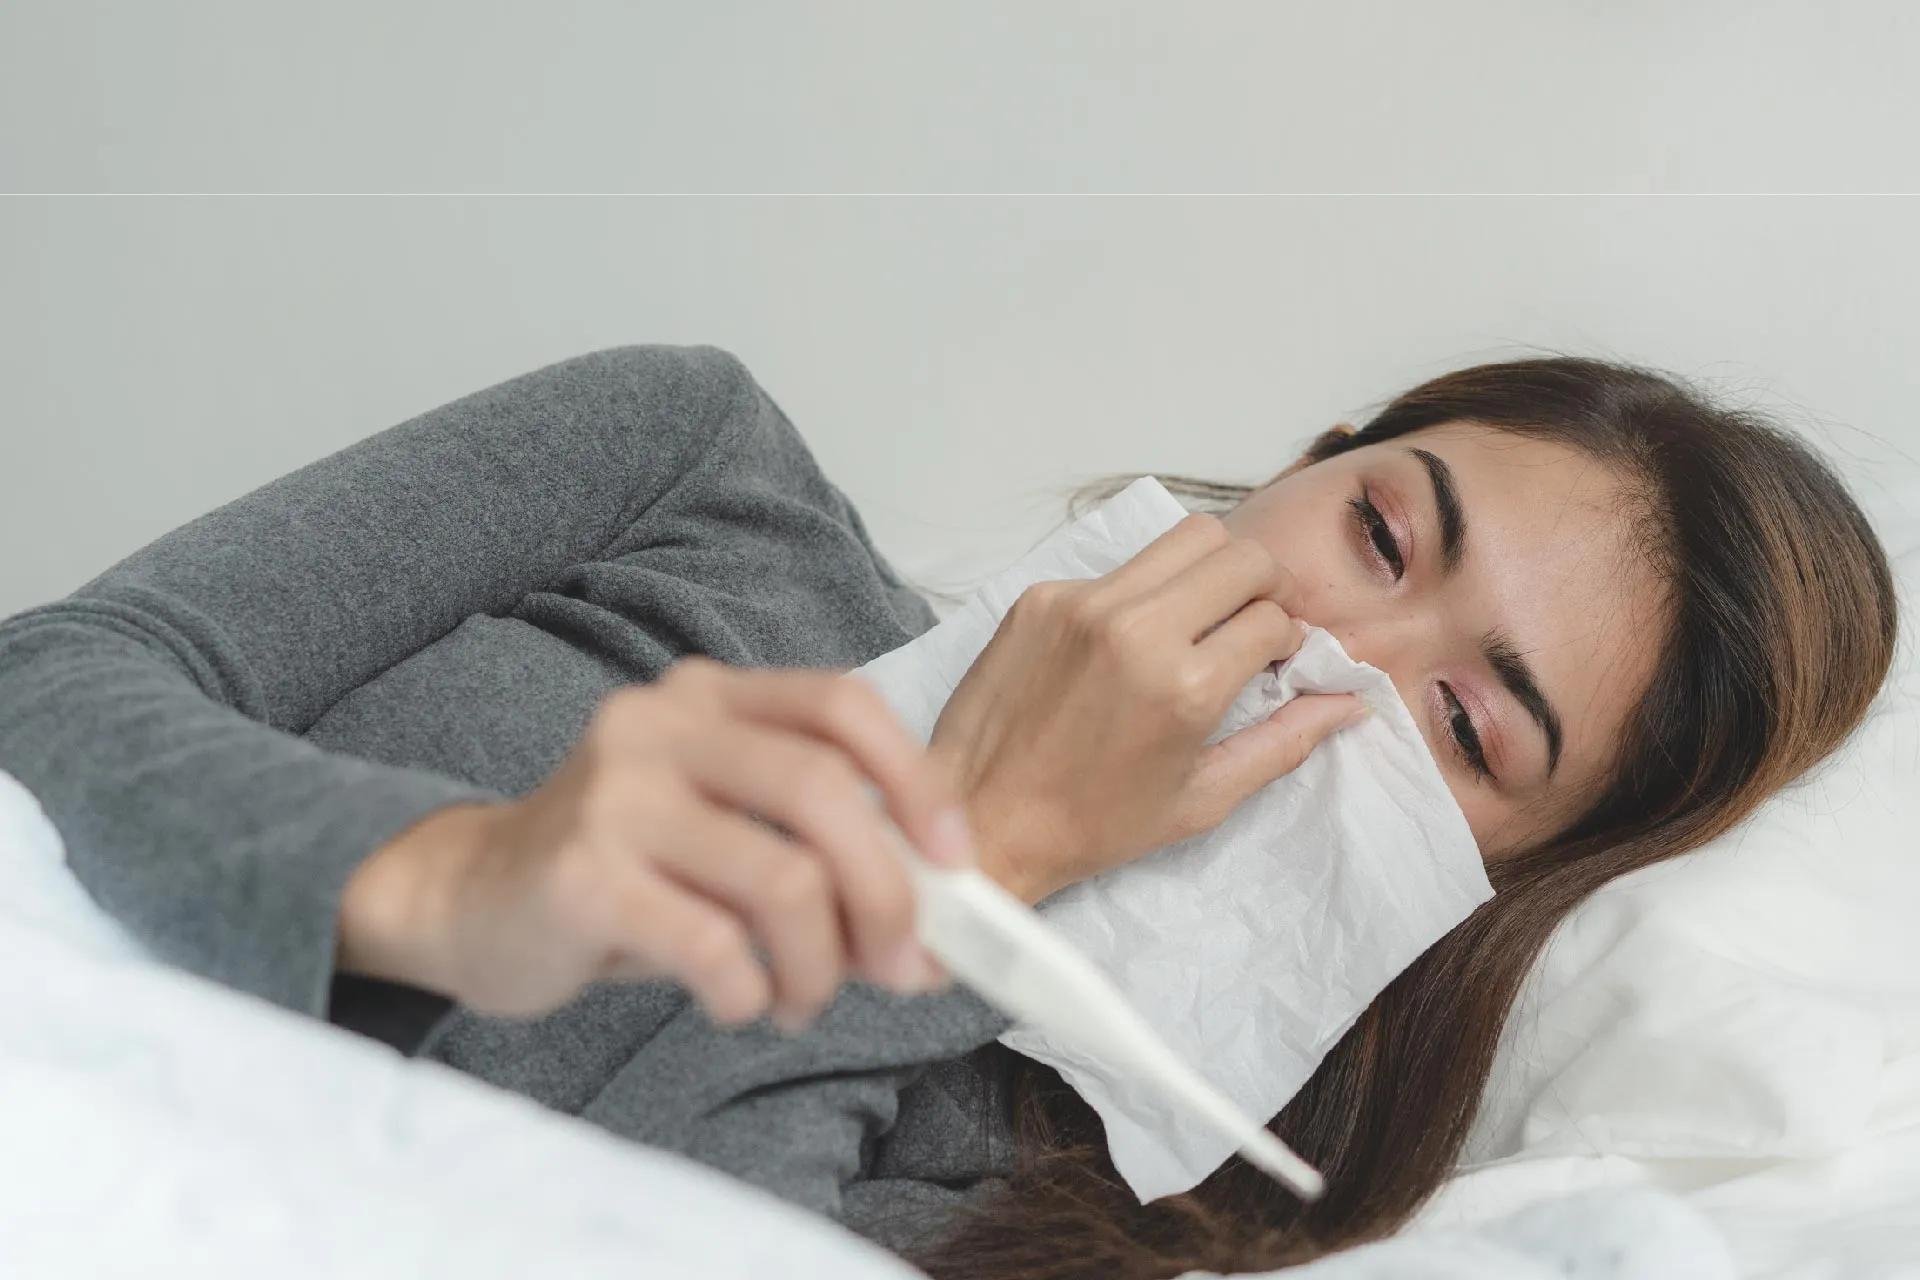 Common Cold: Symptoms, How to Treat and Diagnosis